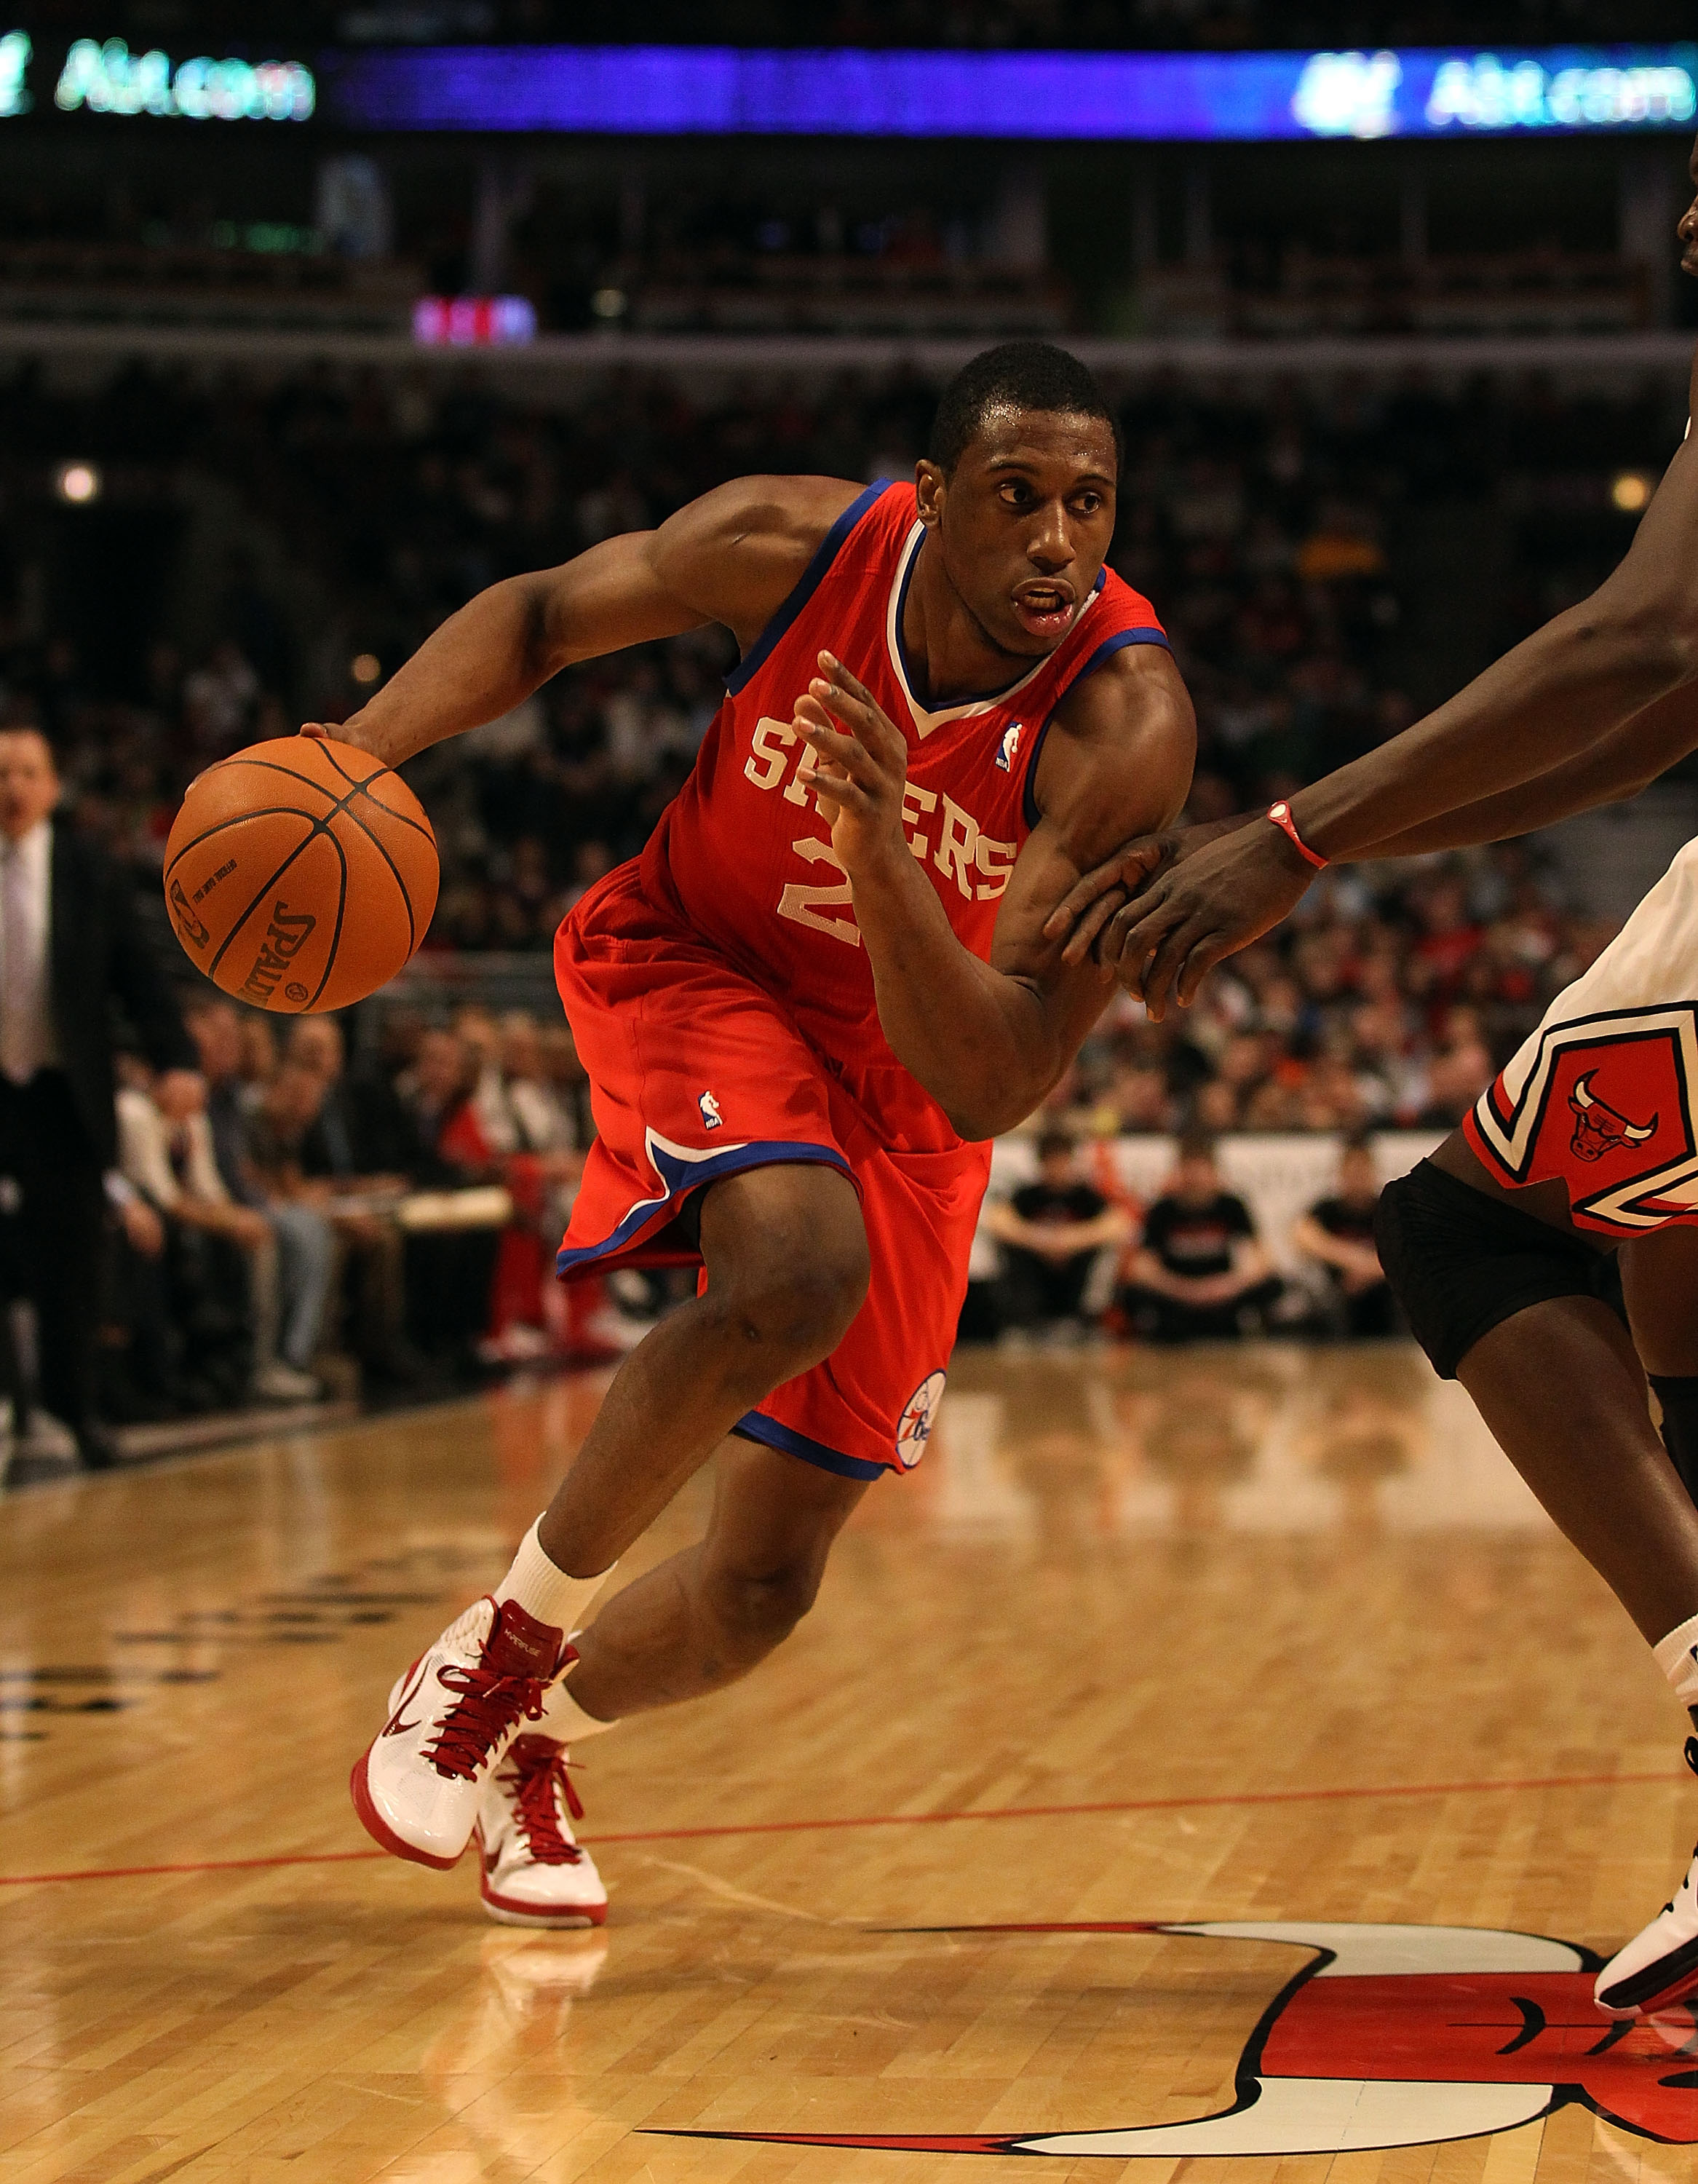 CHICAGO, IL - DECEMBER 21: Thaddeus Young #21 of the Philadelphia 76ers drives to the basket against the Chicago Bulls at the United Center on December 21, 2010 in Chicago, Illinois. The Bulls defeated the 76ers 121-76. NOTE TO USER: User expressly acknow